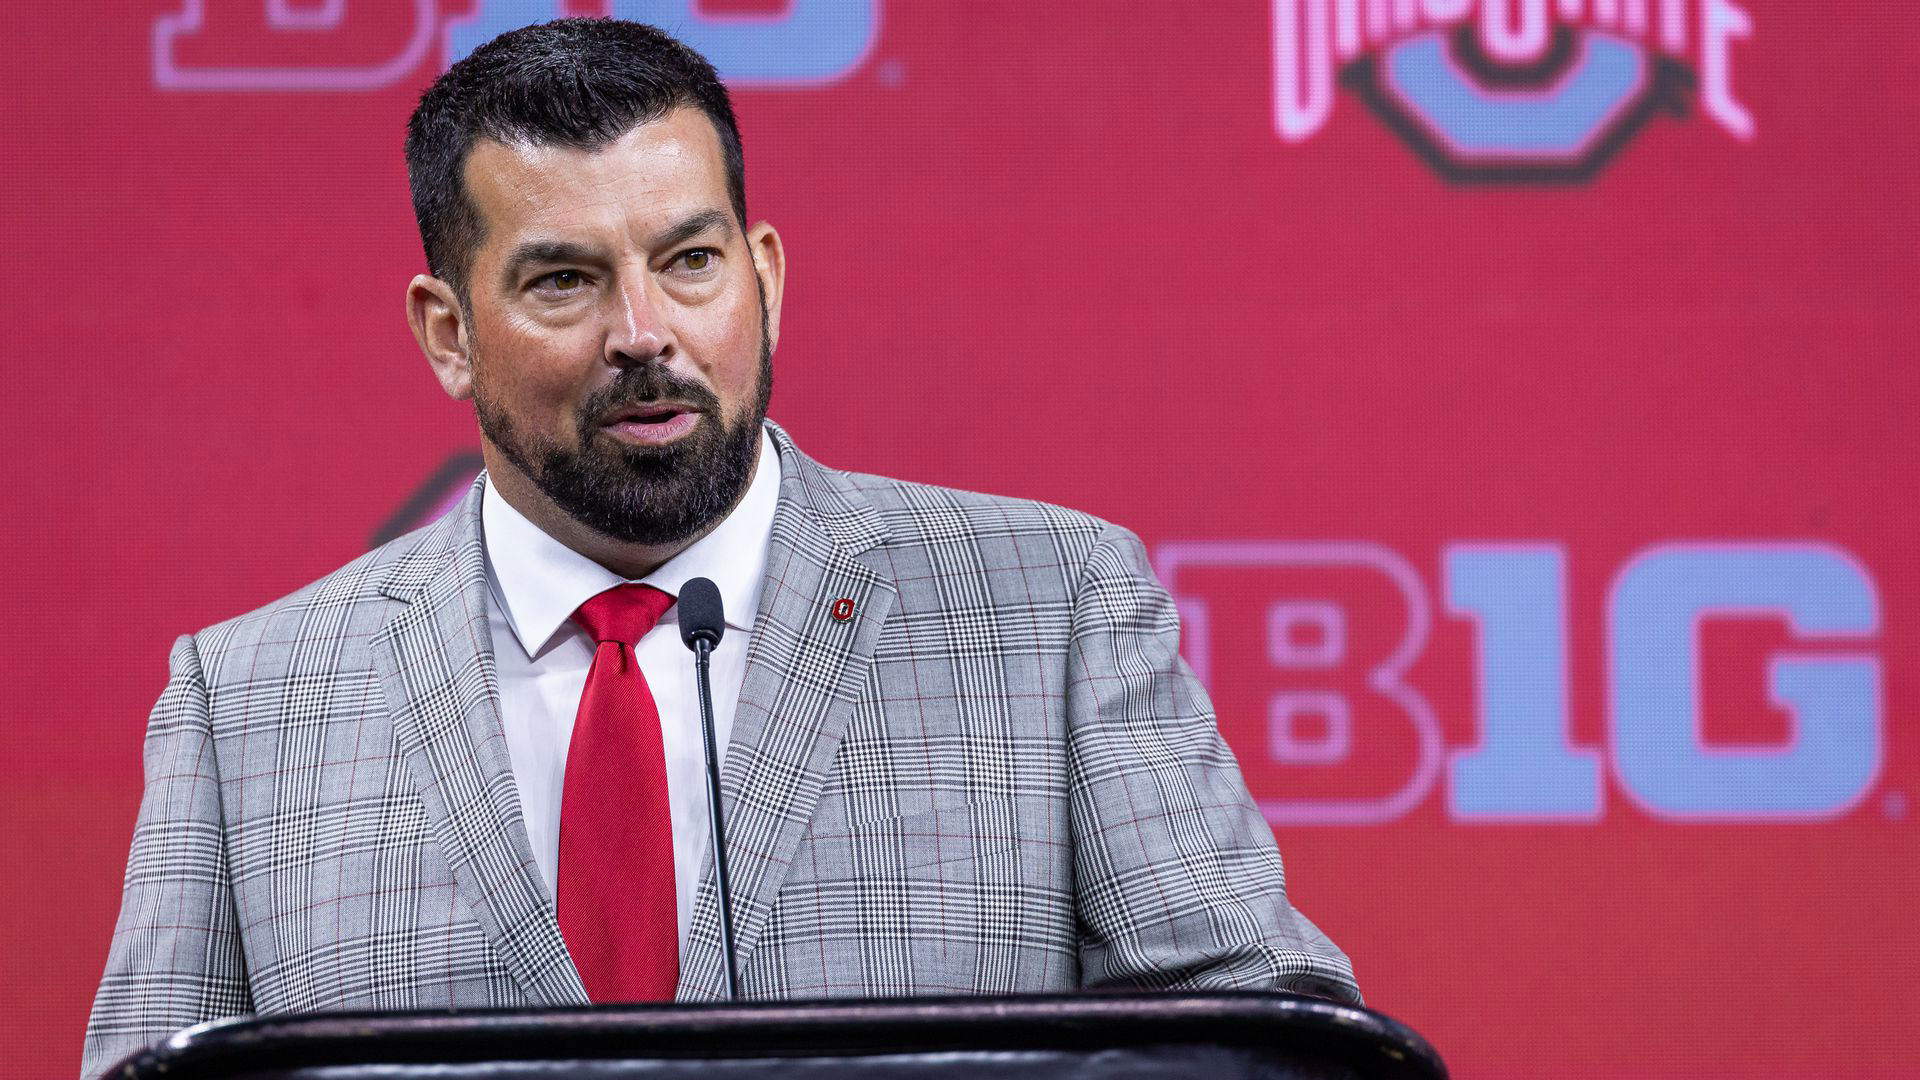 Indiana football Here’s what Ryan Day said about the Hoosiers at Big